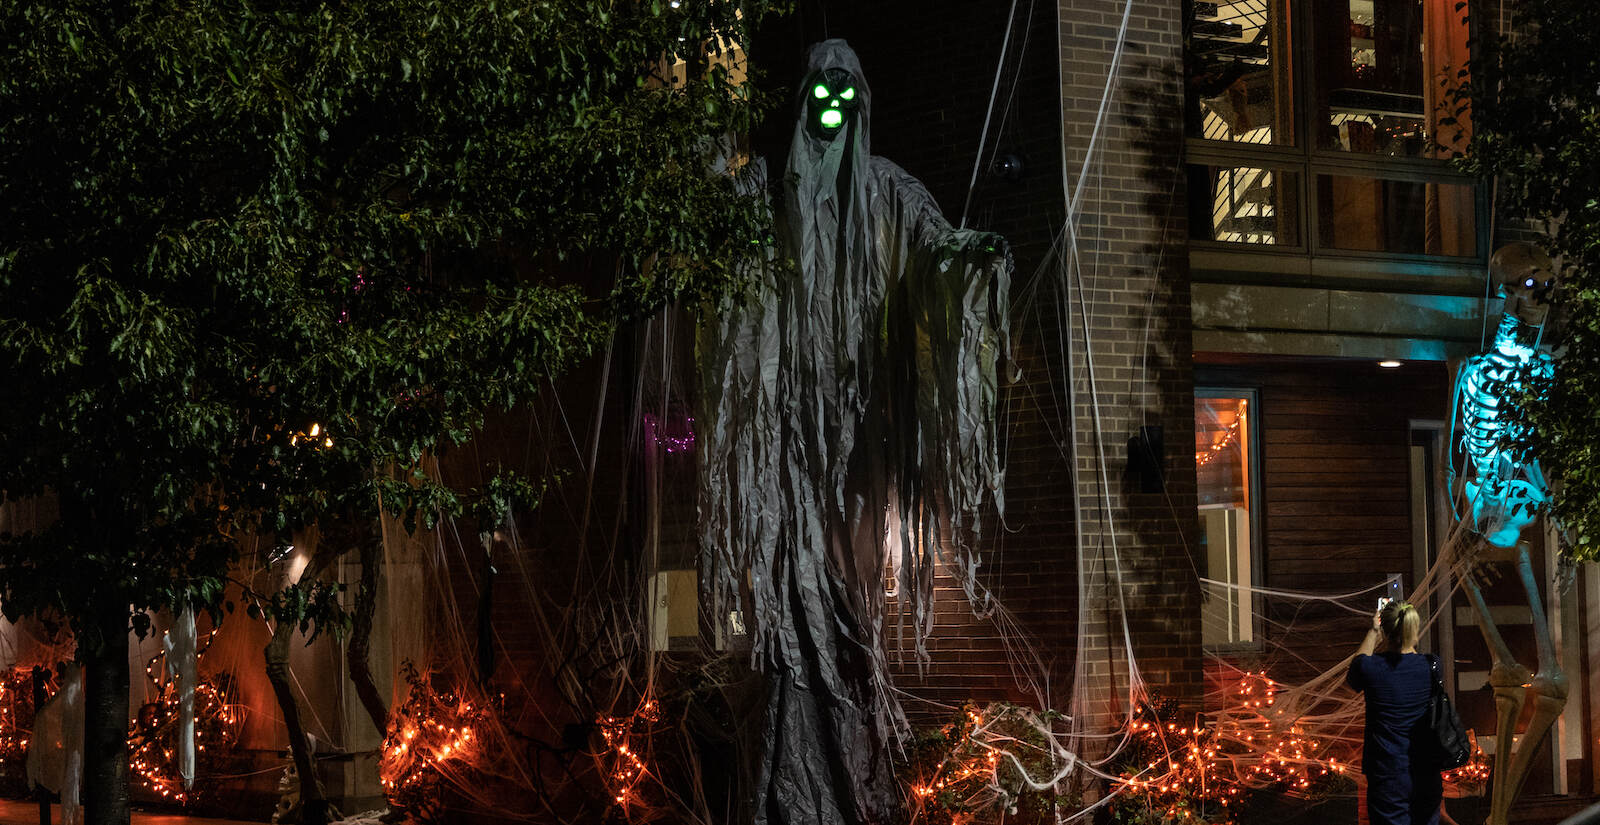 Towering figures are seen in a Halloween display outside a Graduate Hospital building